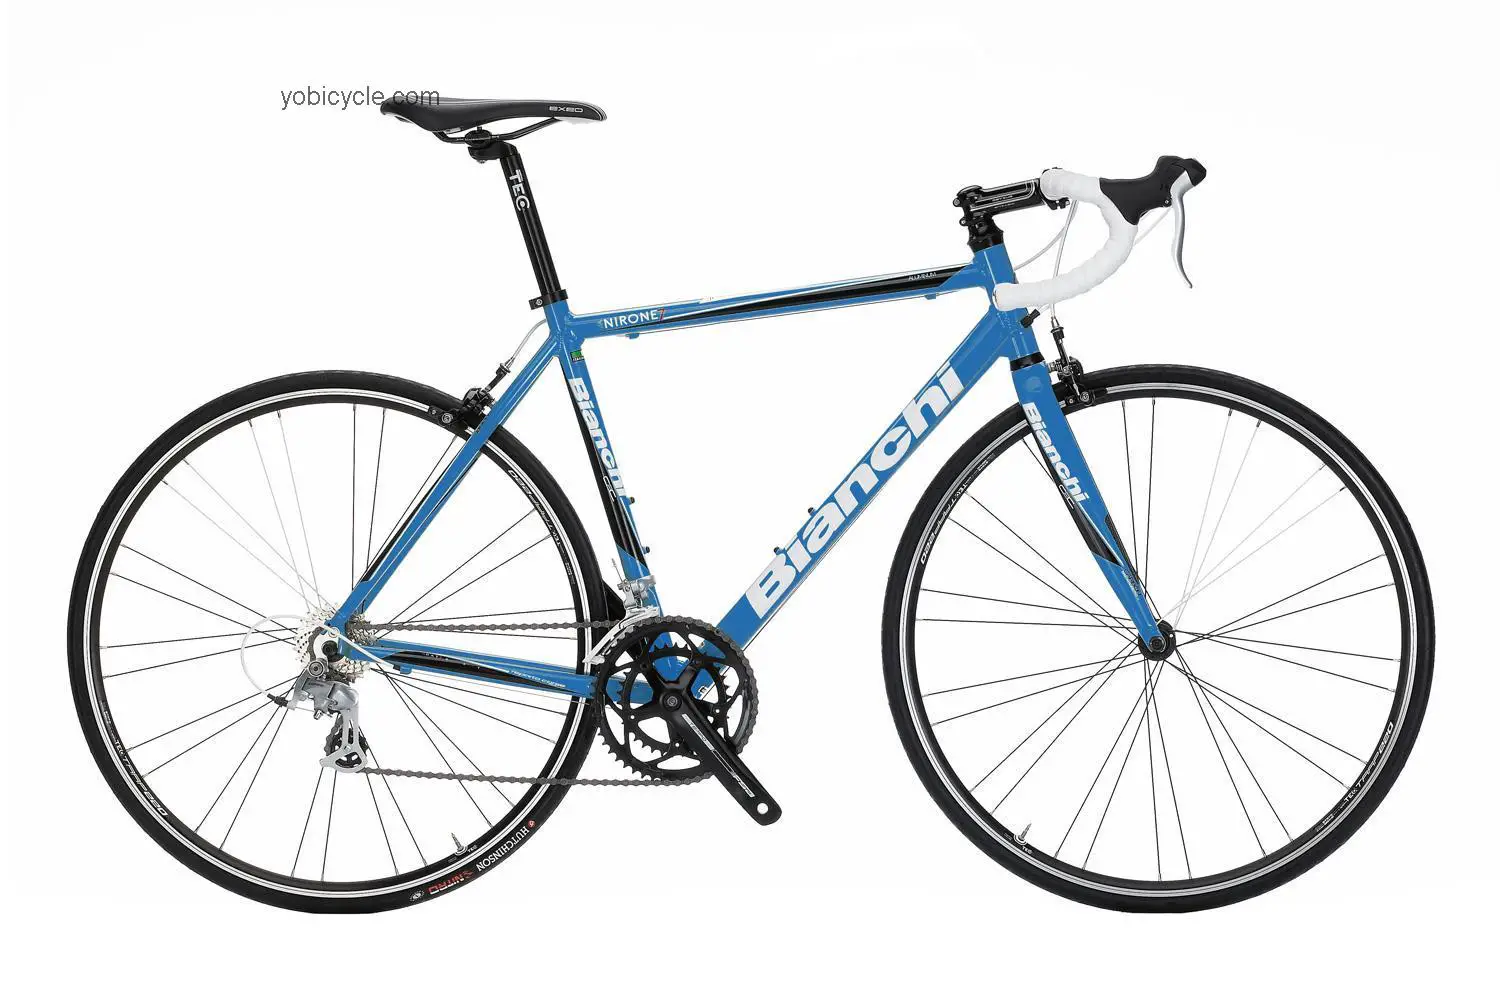 Bianchi Via Nirone 7 2300 competitors and comparison tool online specs and performance